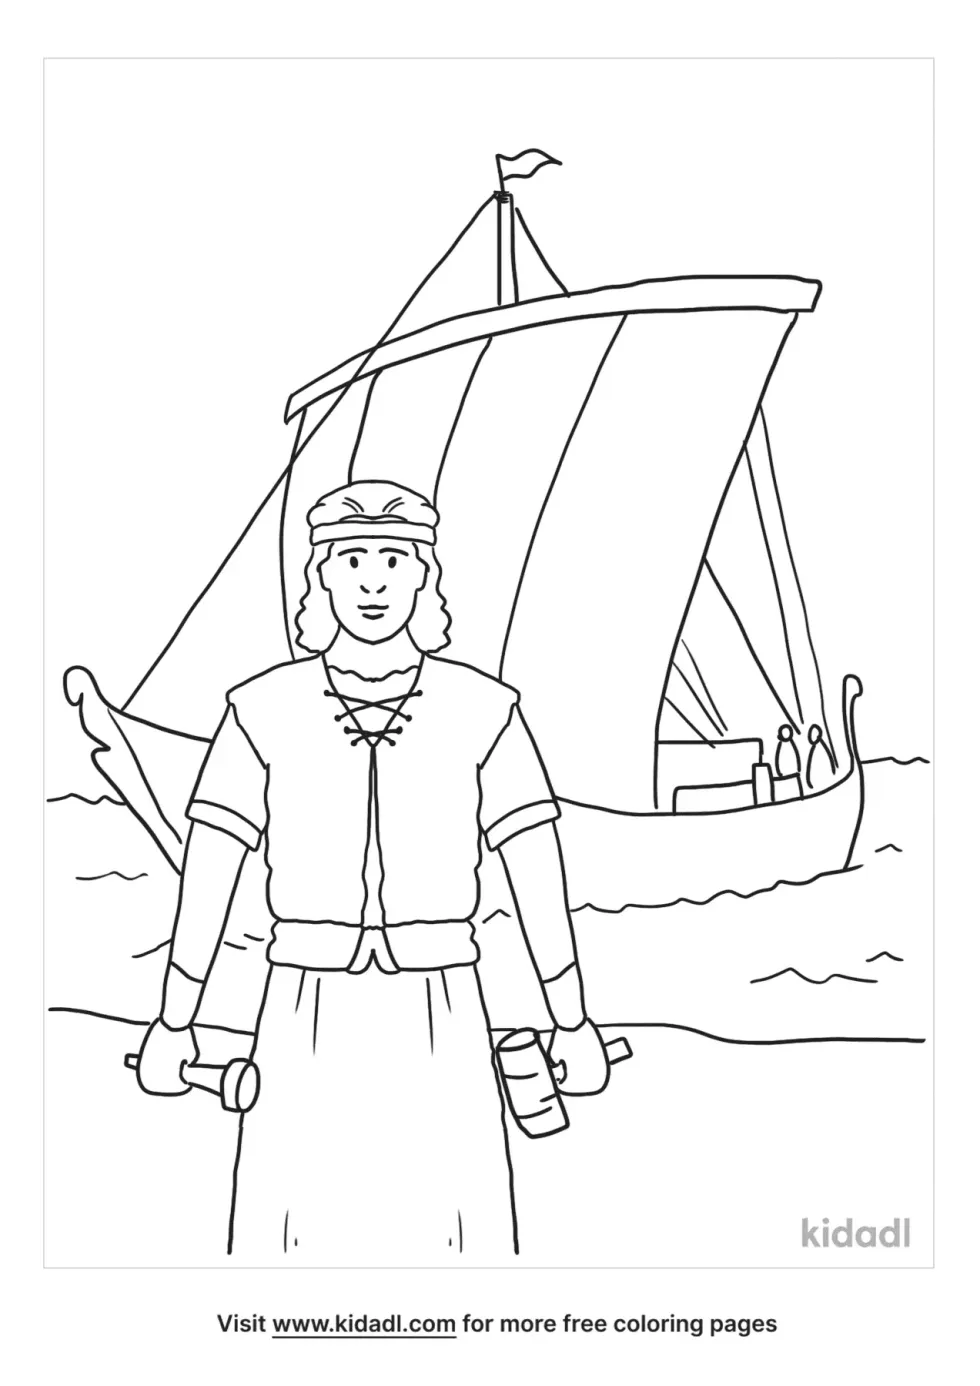 Lds Nephi Builds A Ship Coloring Page